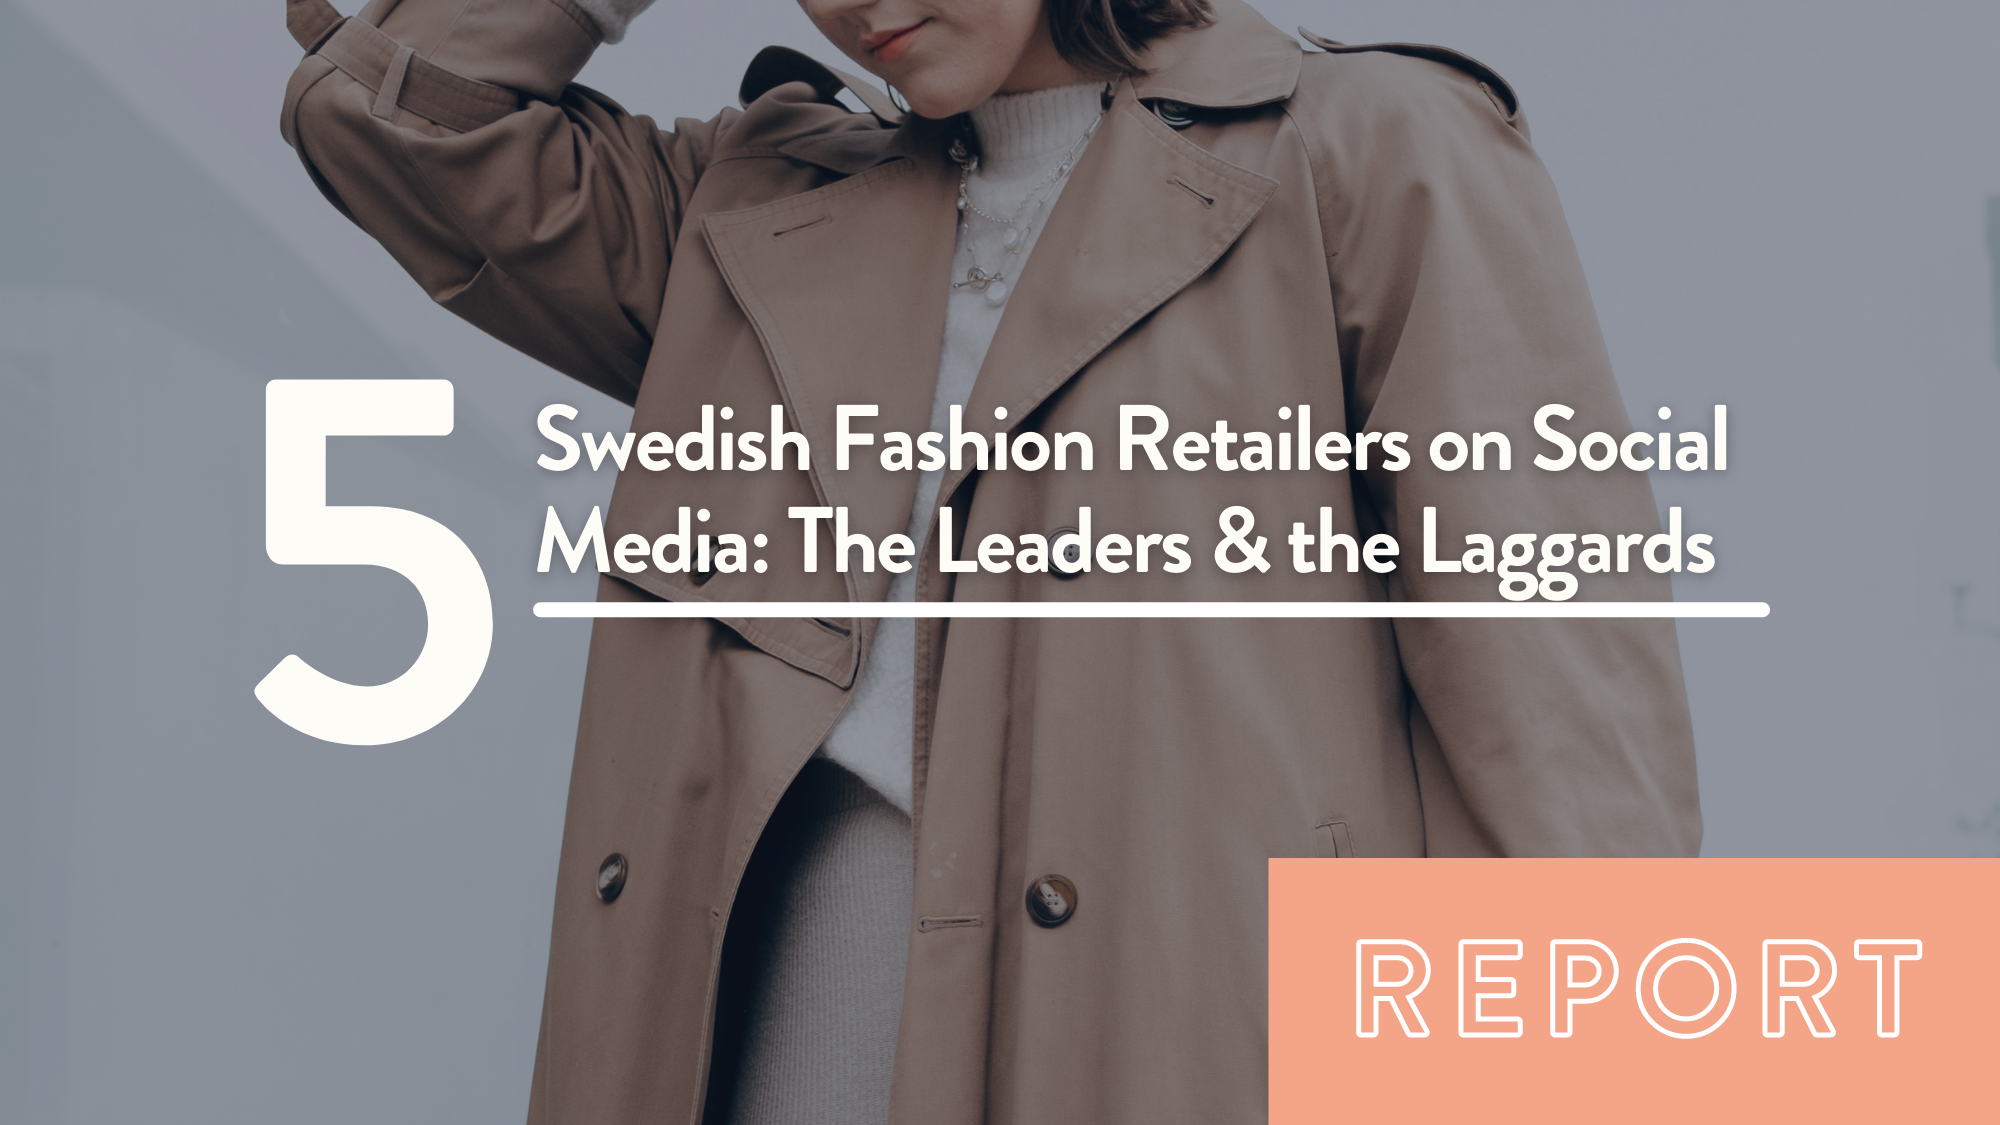 5 Swedish Fashion Retailers on Social Media: The Leaders & the Laggards